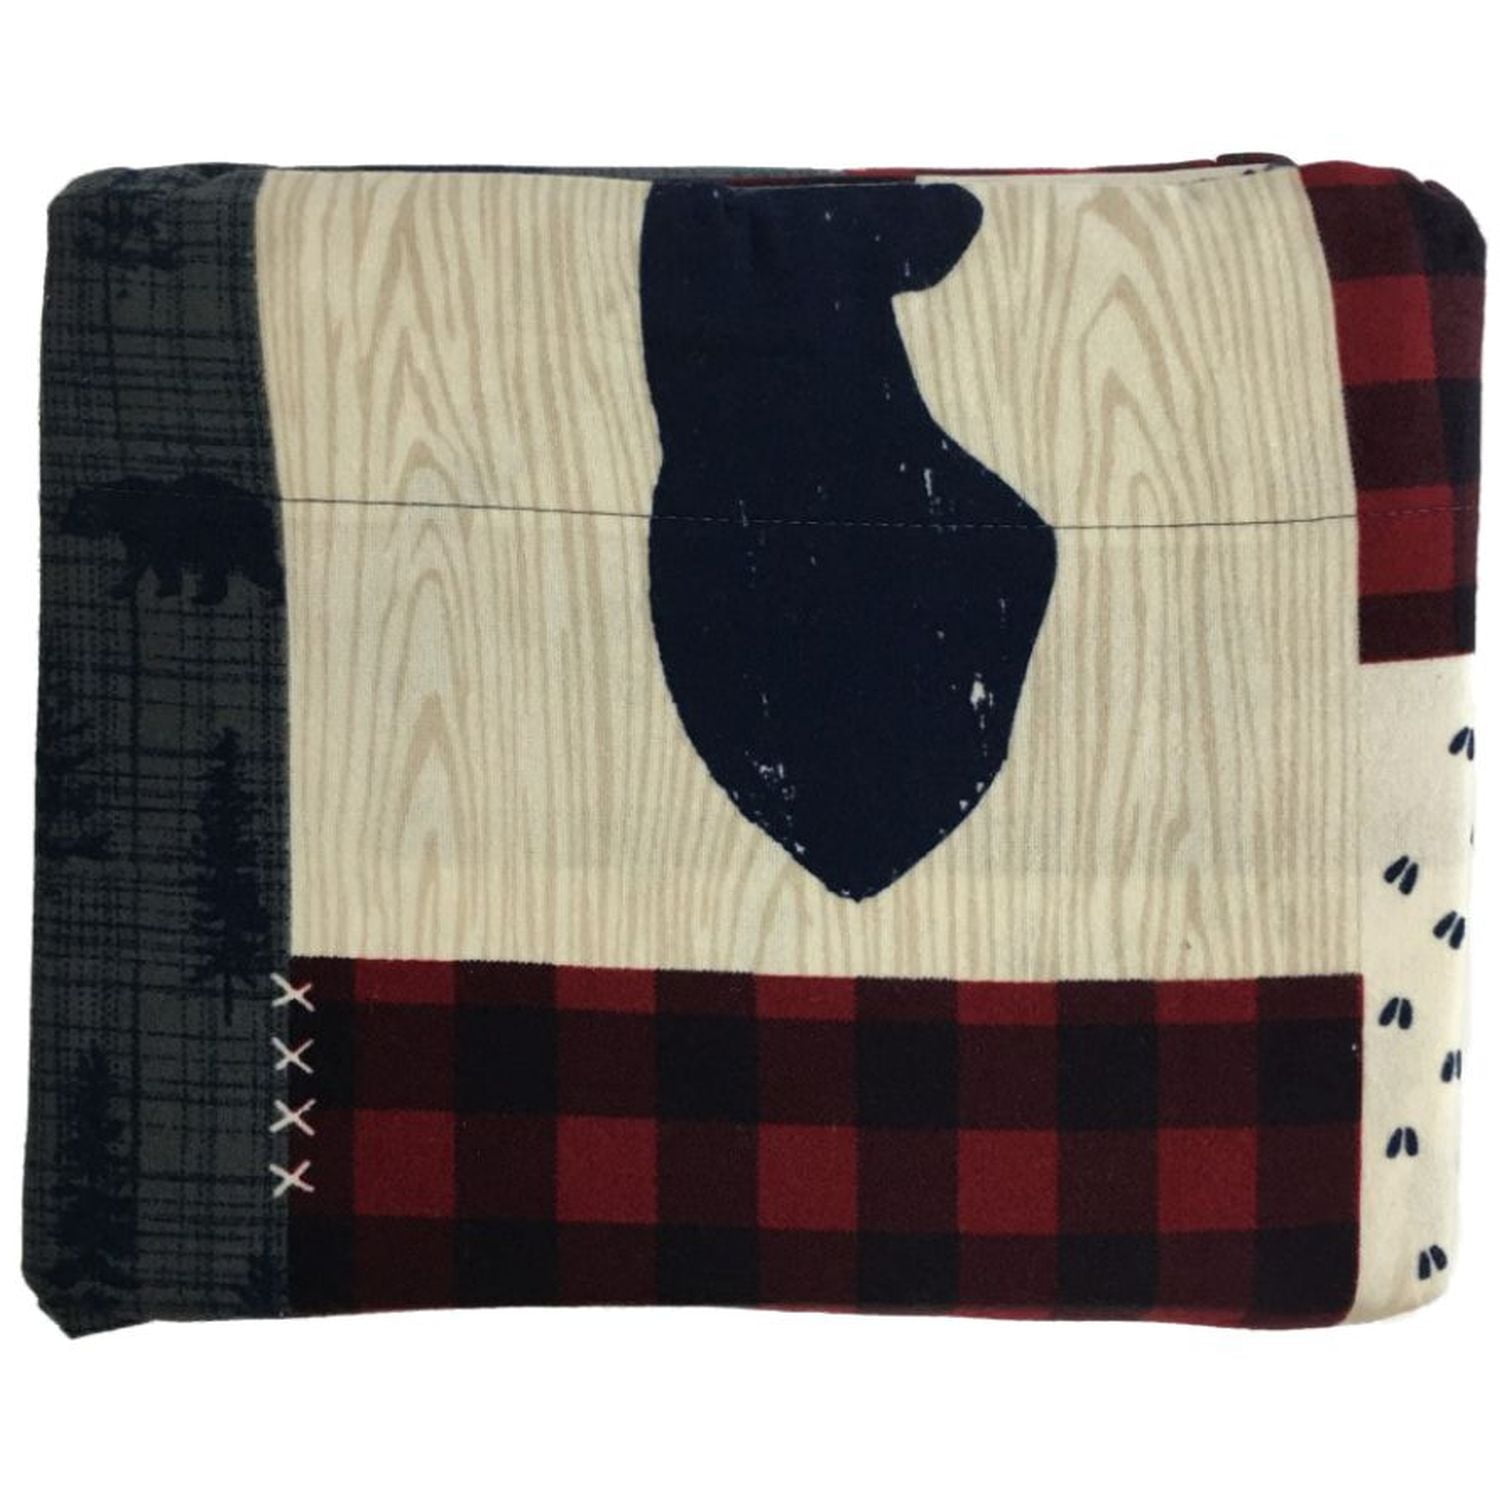 Cuddl Duds Lodge Patchwork Cabin Flannel Sheet Set Queen Size Plaid Check New 